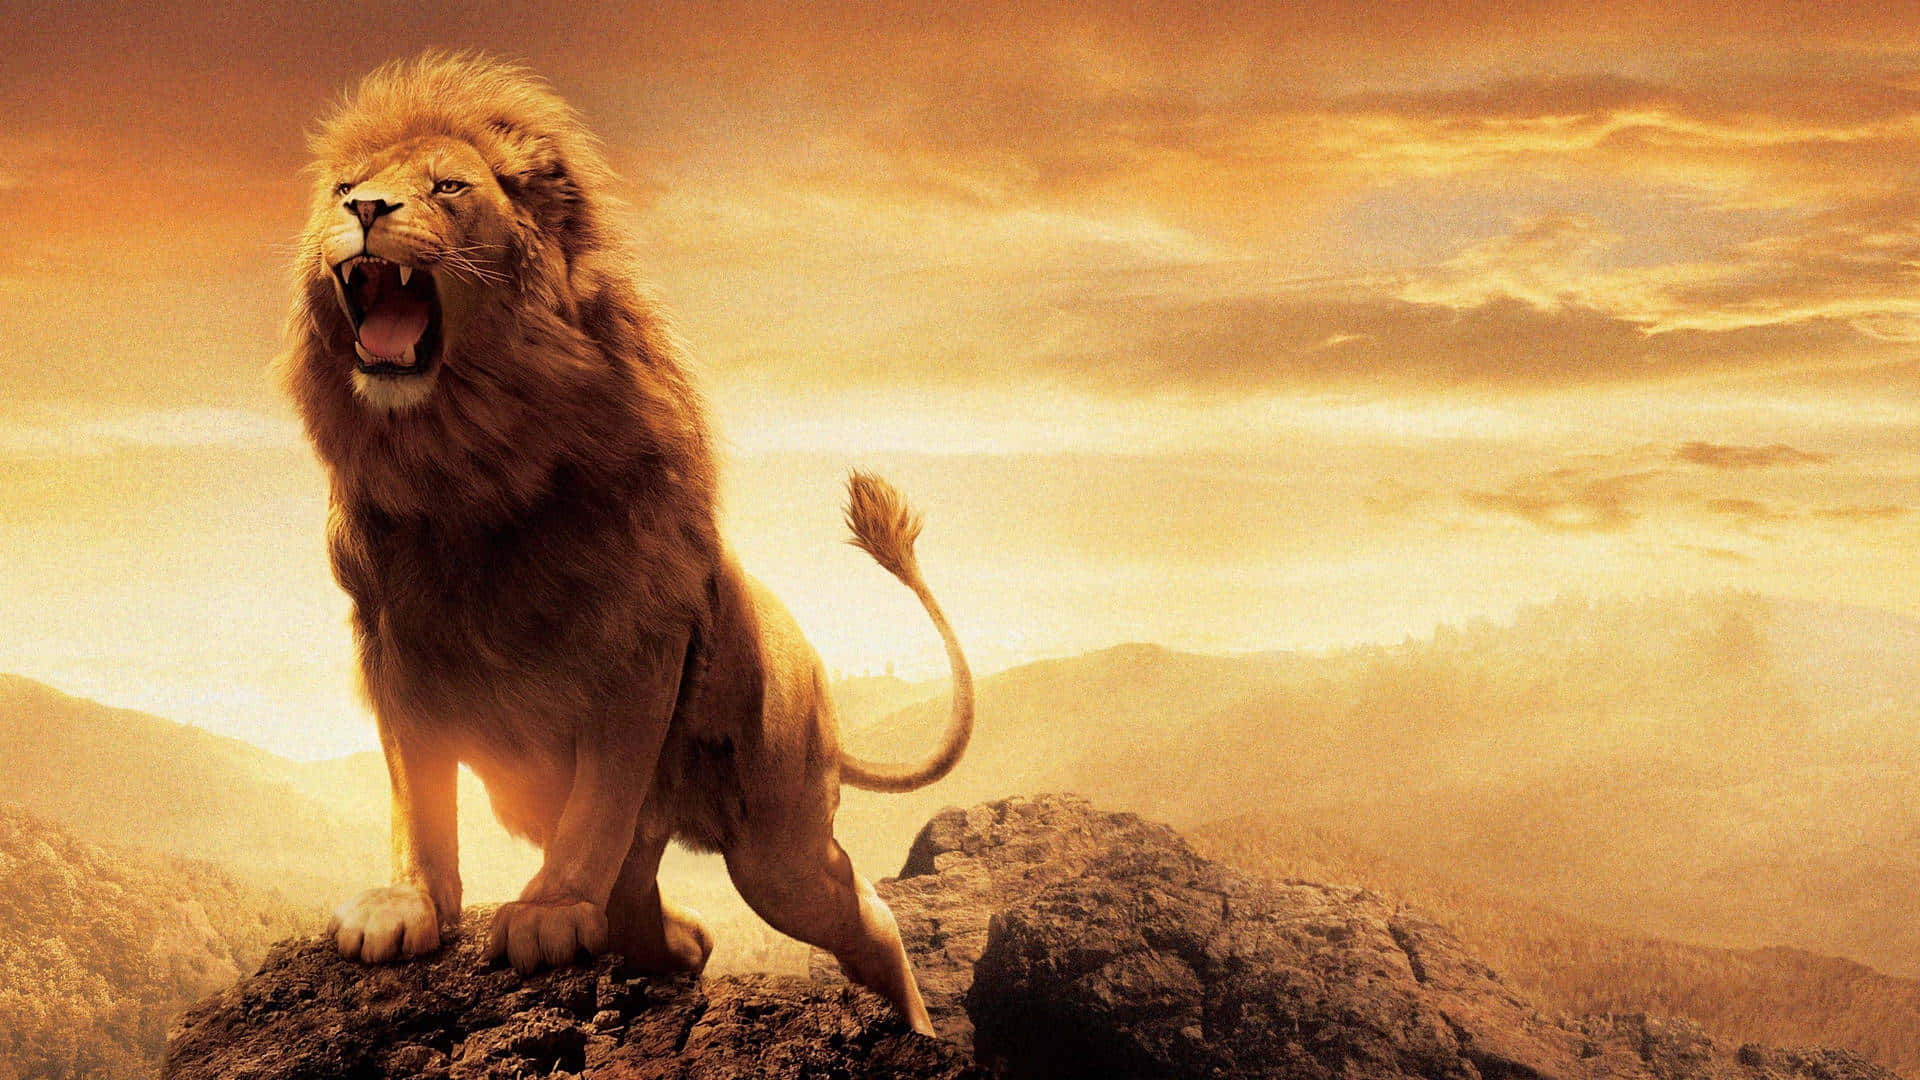 "The majesty of the Lion of Judah, king of kings and lord of lords"